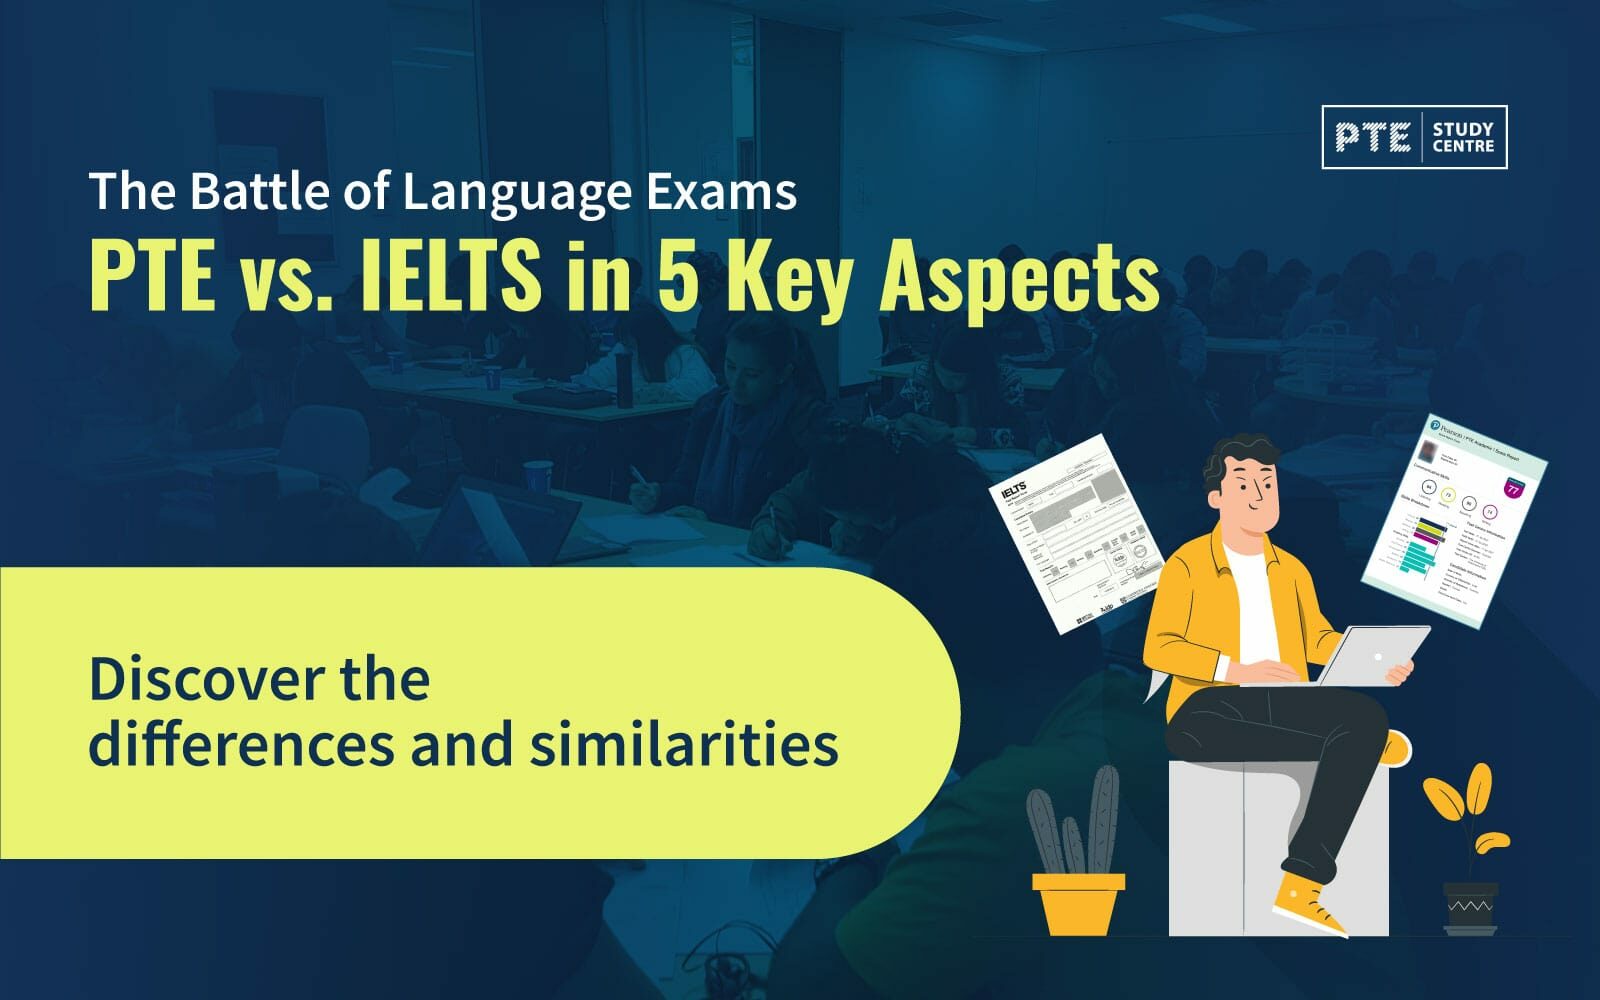 The Battle of Language Exams: PTE vs. IELTS in 5 Key Aspects